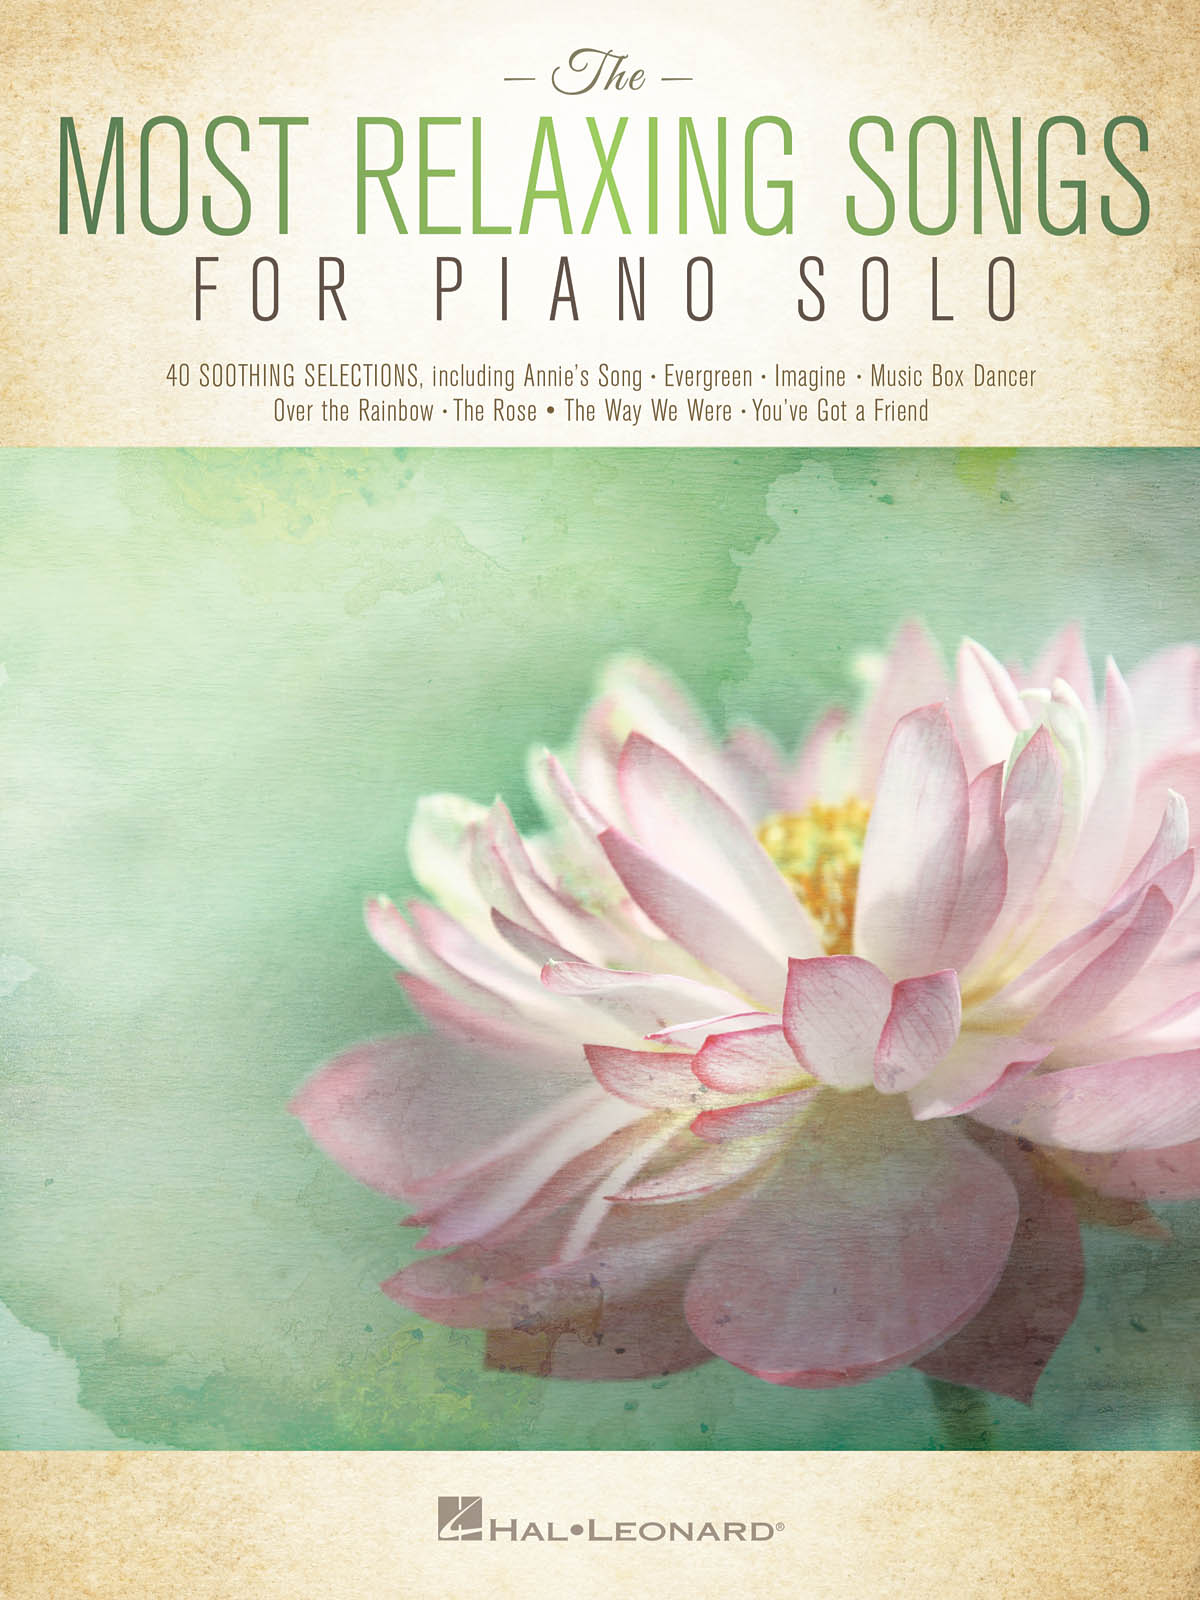 The Most Relaxing Songs For Piano Solo